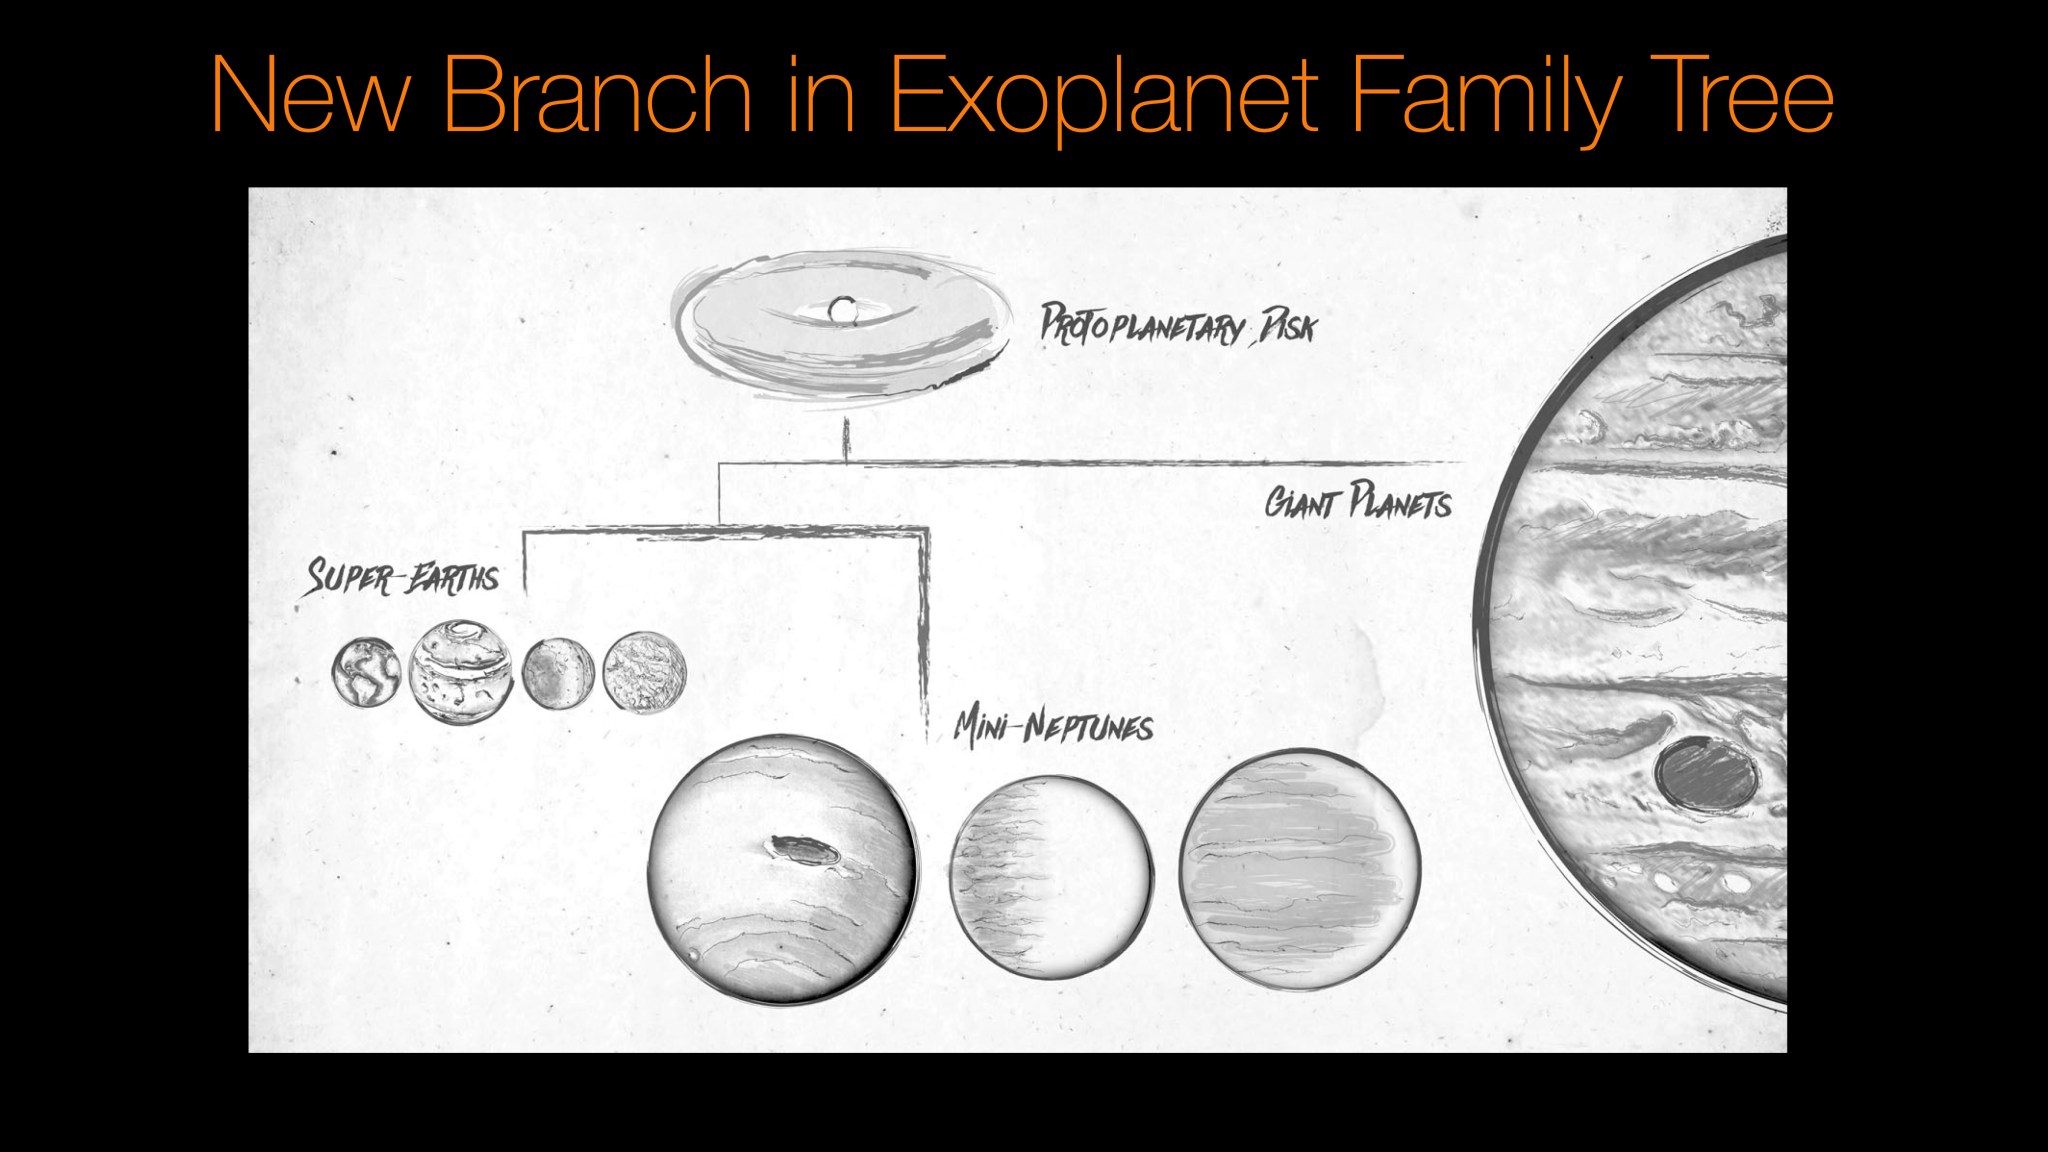 New Branch in the Exoplanet Family Tree